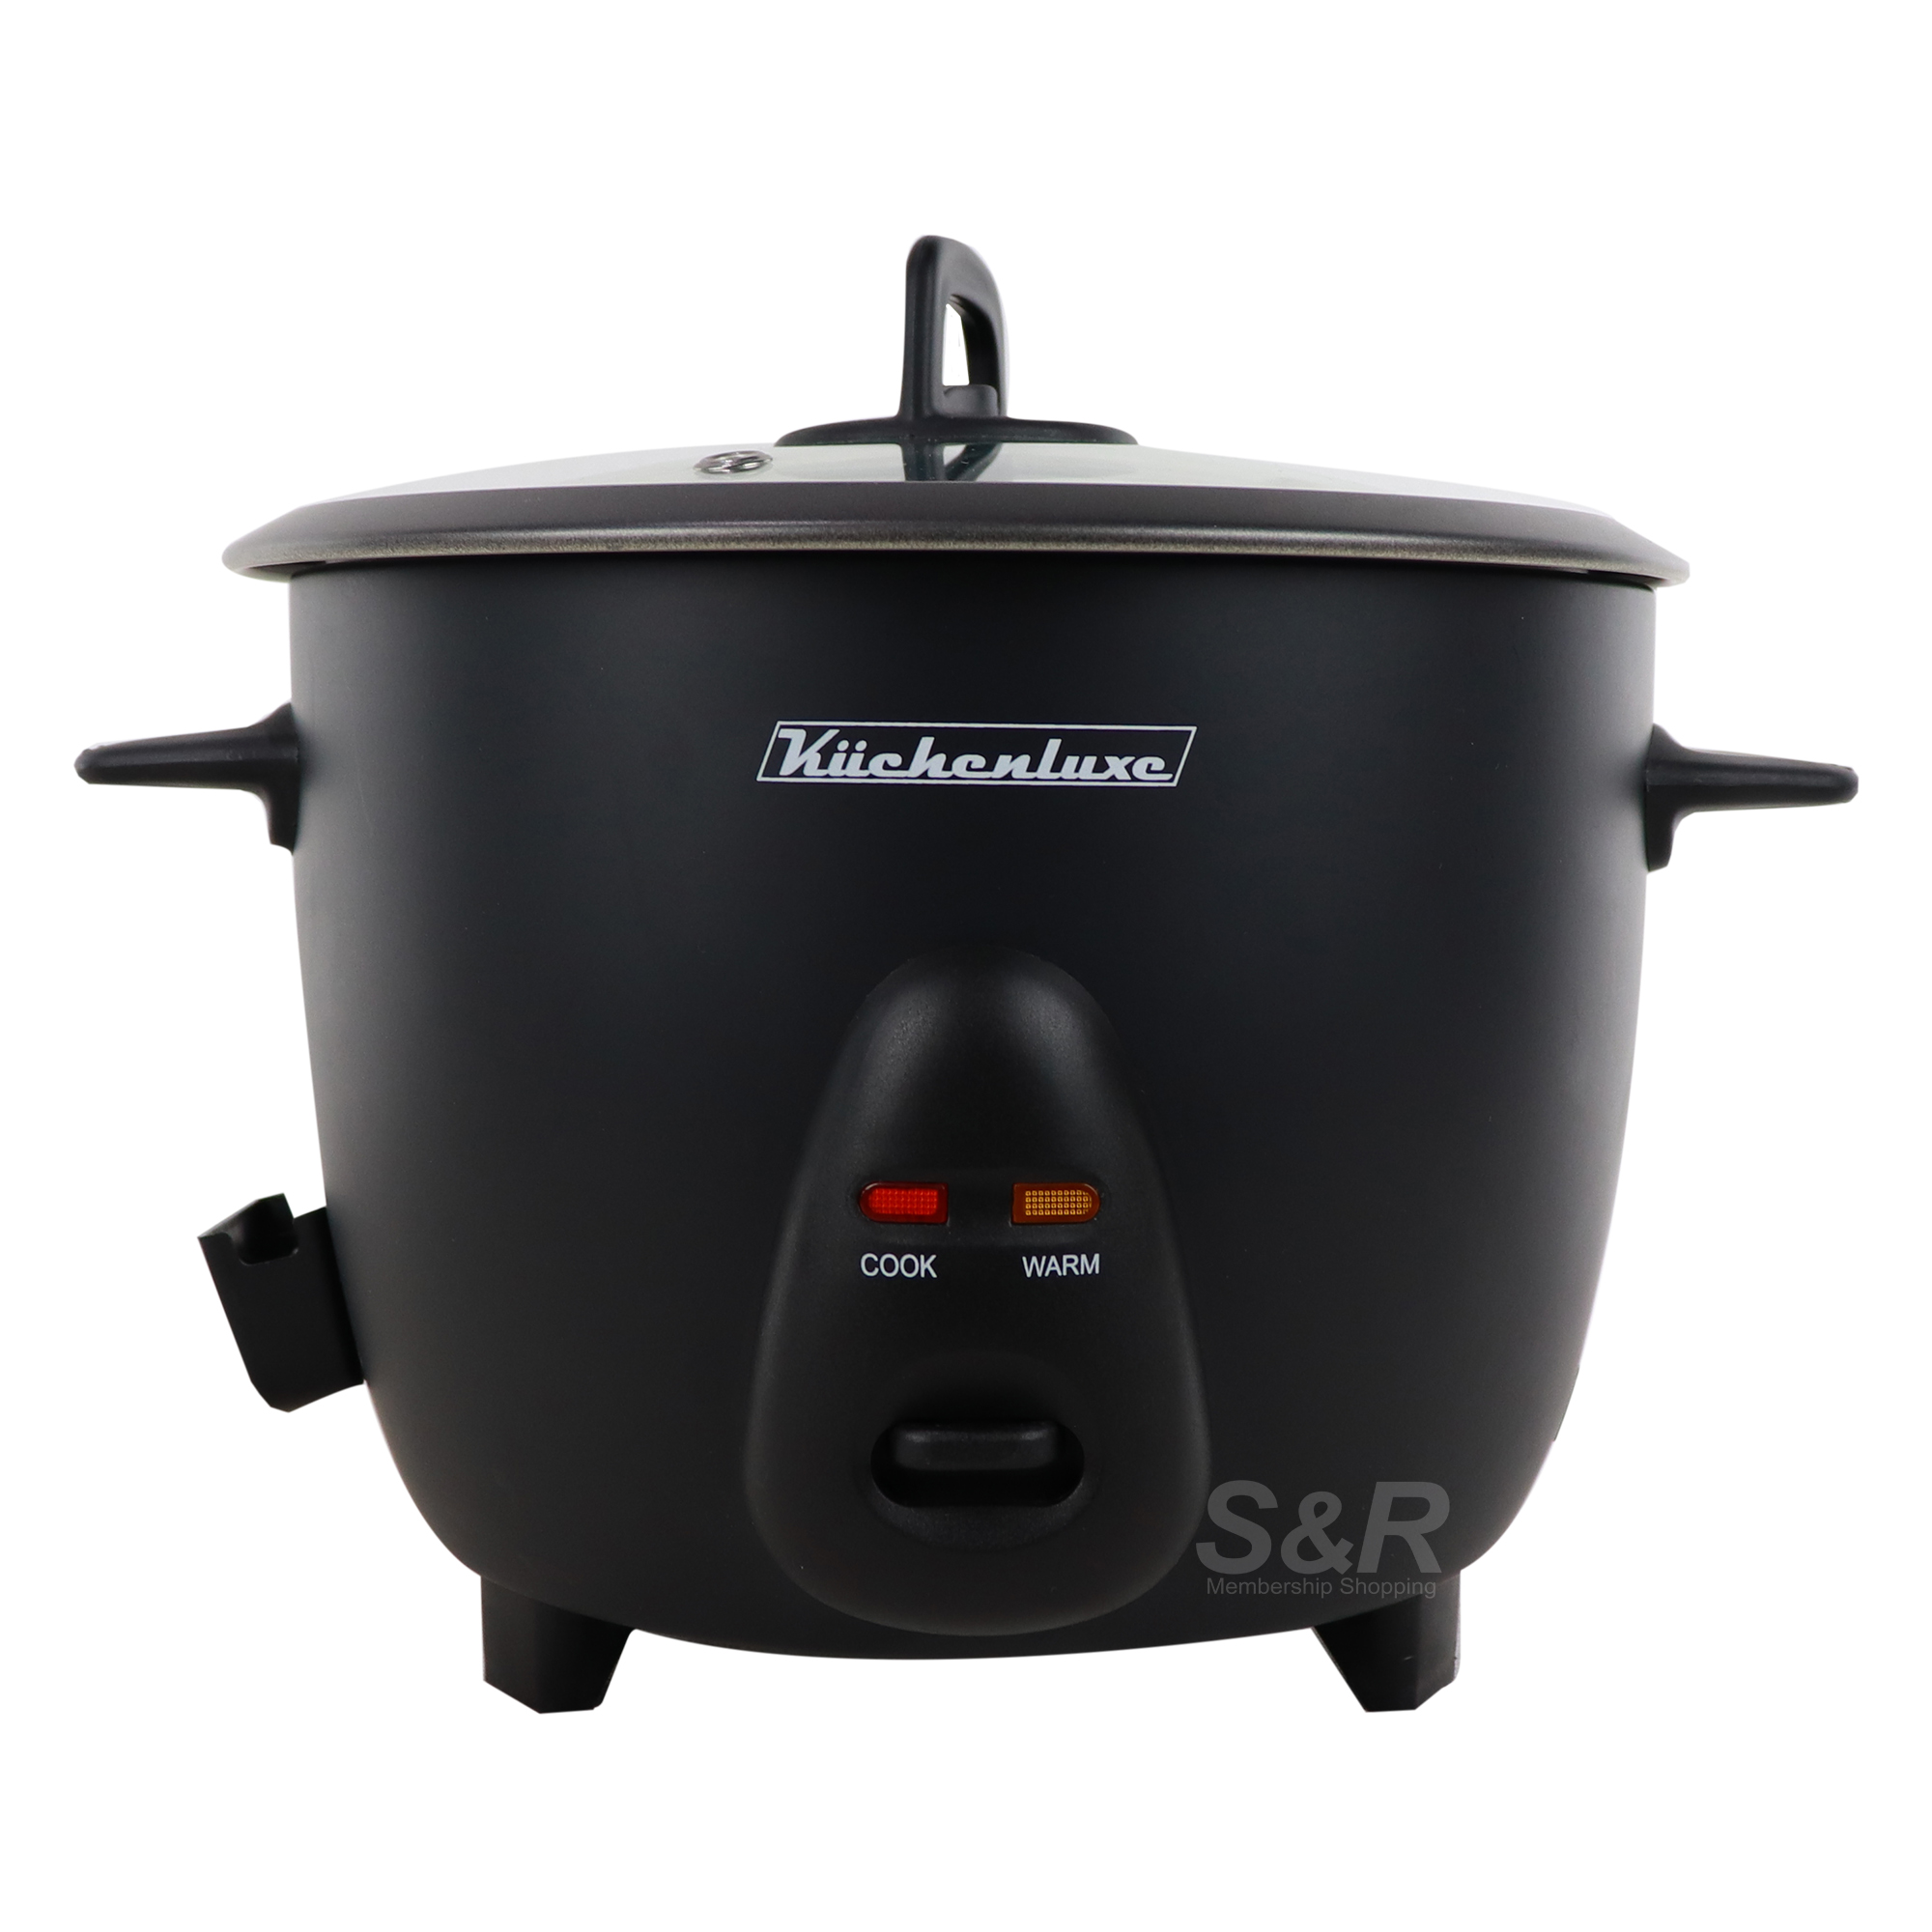 Kuchenluxe 1.5L Rice Cooker 8-cup capacity KRC15-M